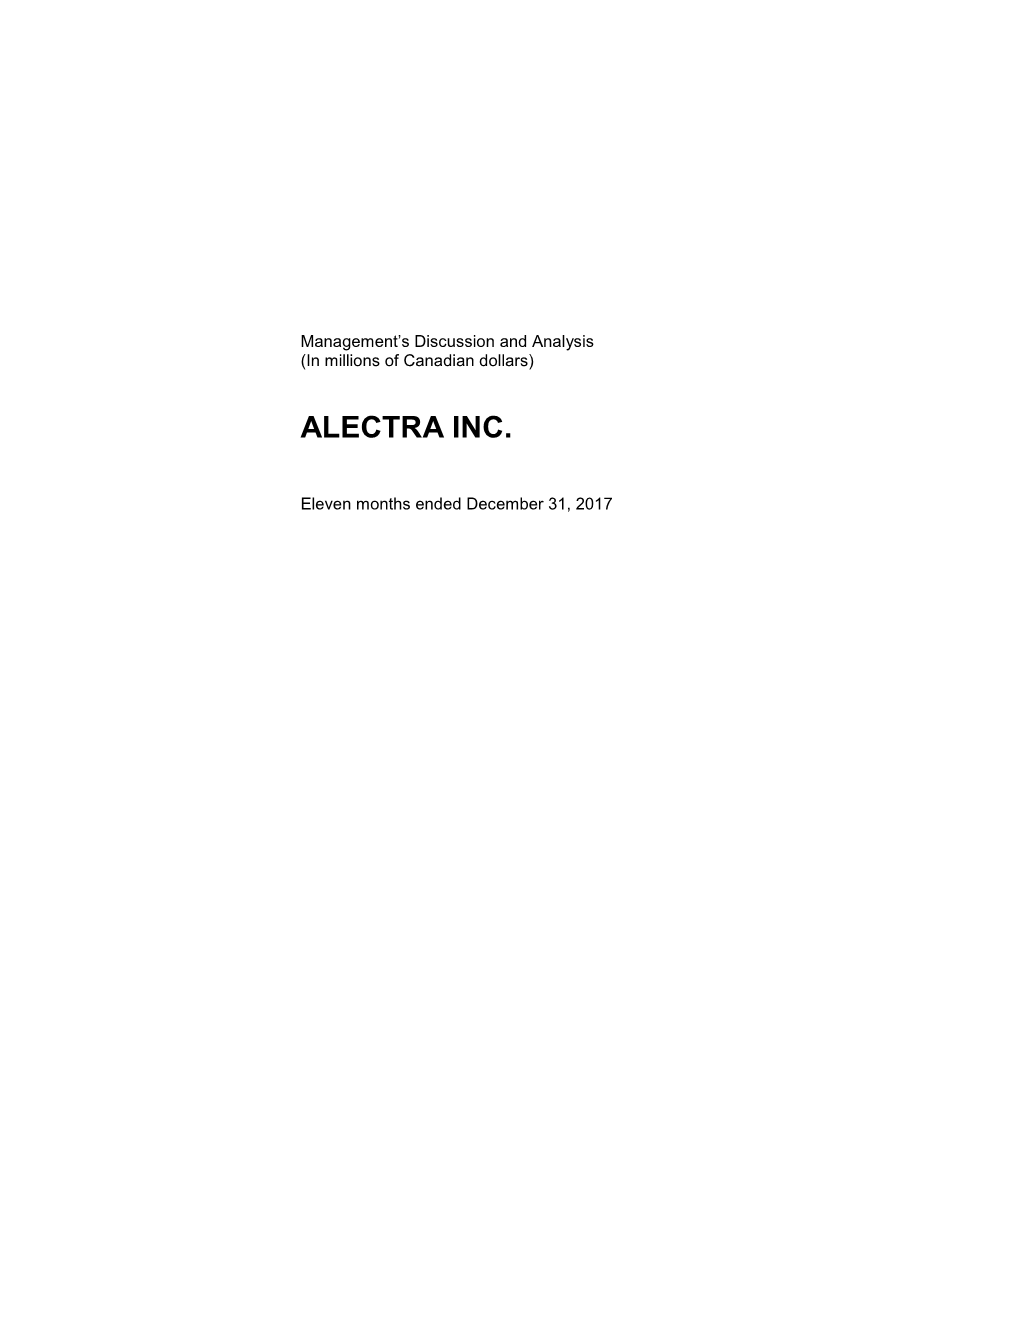 Alectra Inc. MD&A 2017